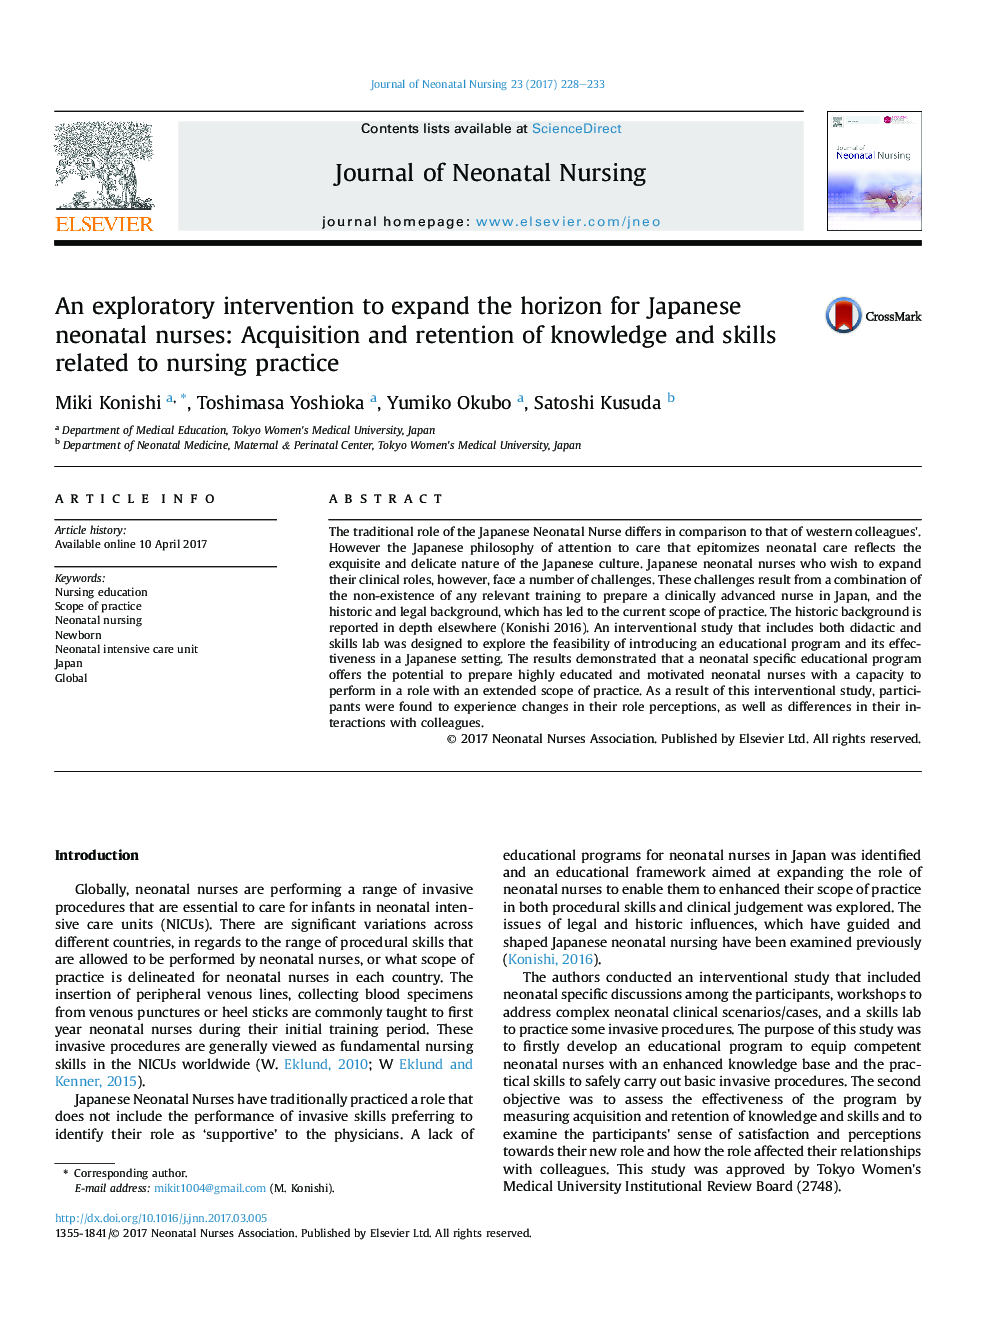 An exploratory intervention to expand the horizon for Japanese neonatal nurses: Acquisition and retention of knowledge and skills related to nursing practice